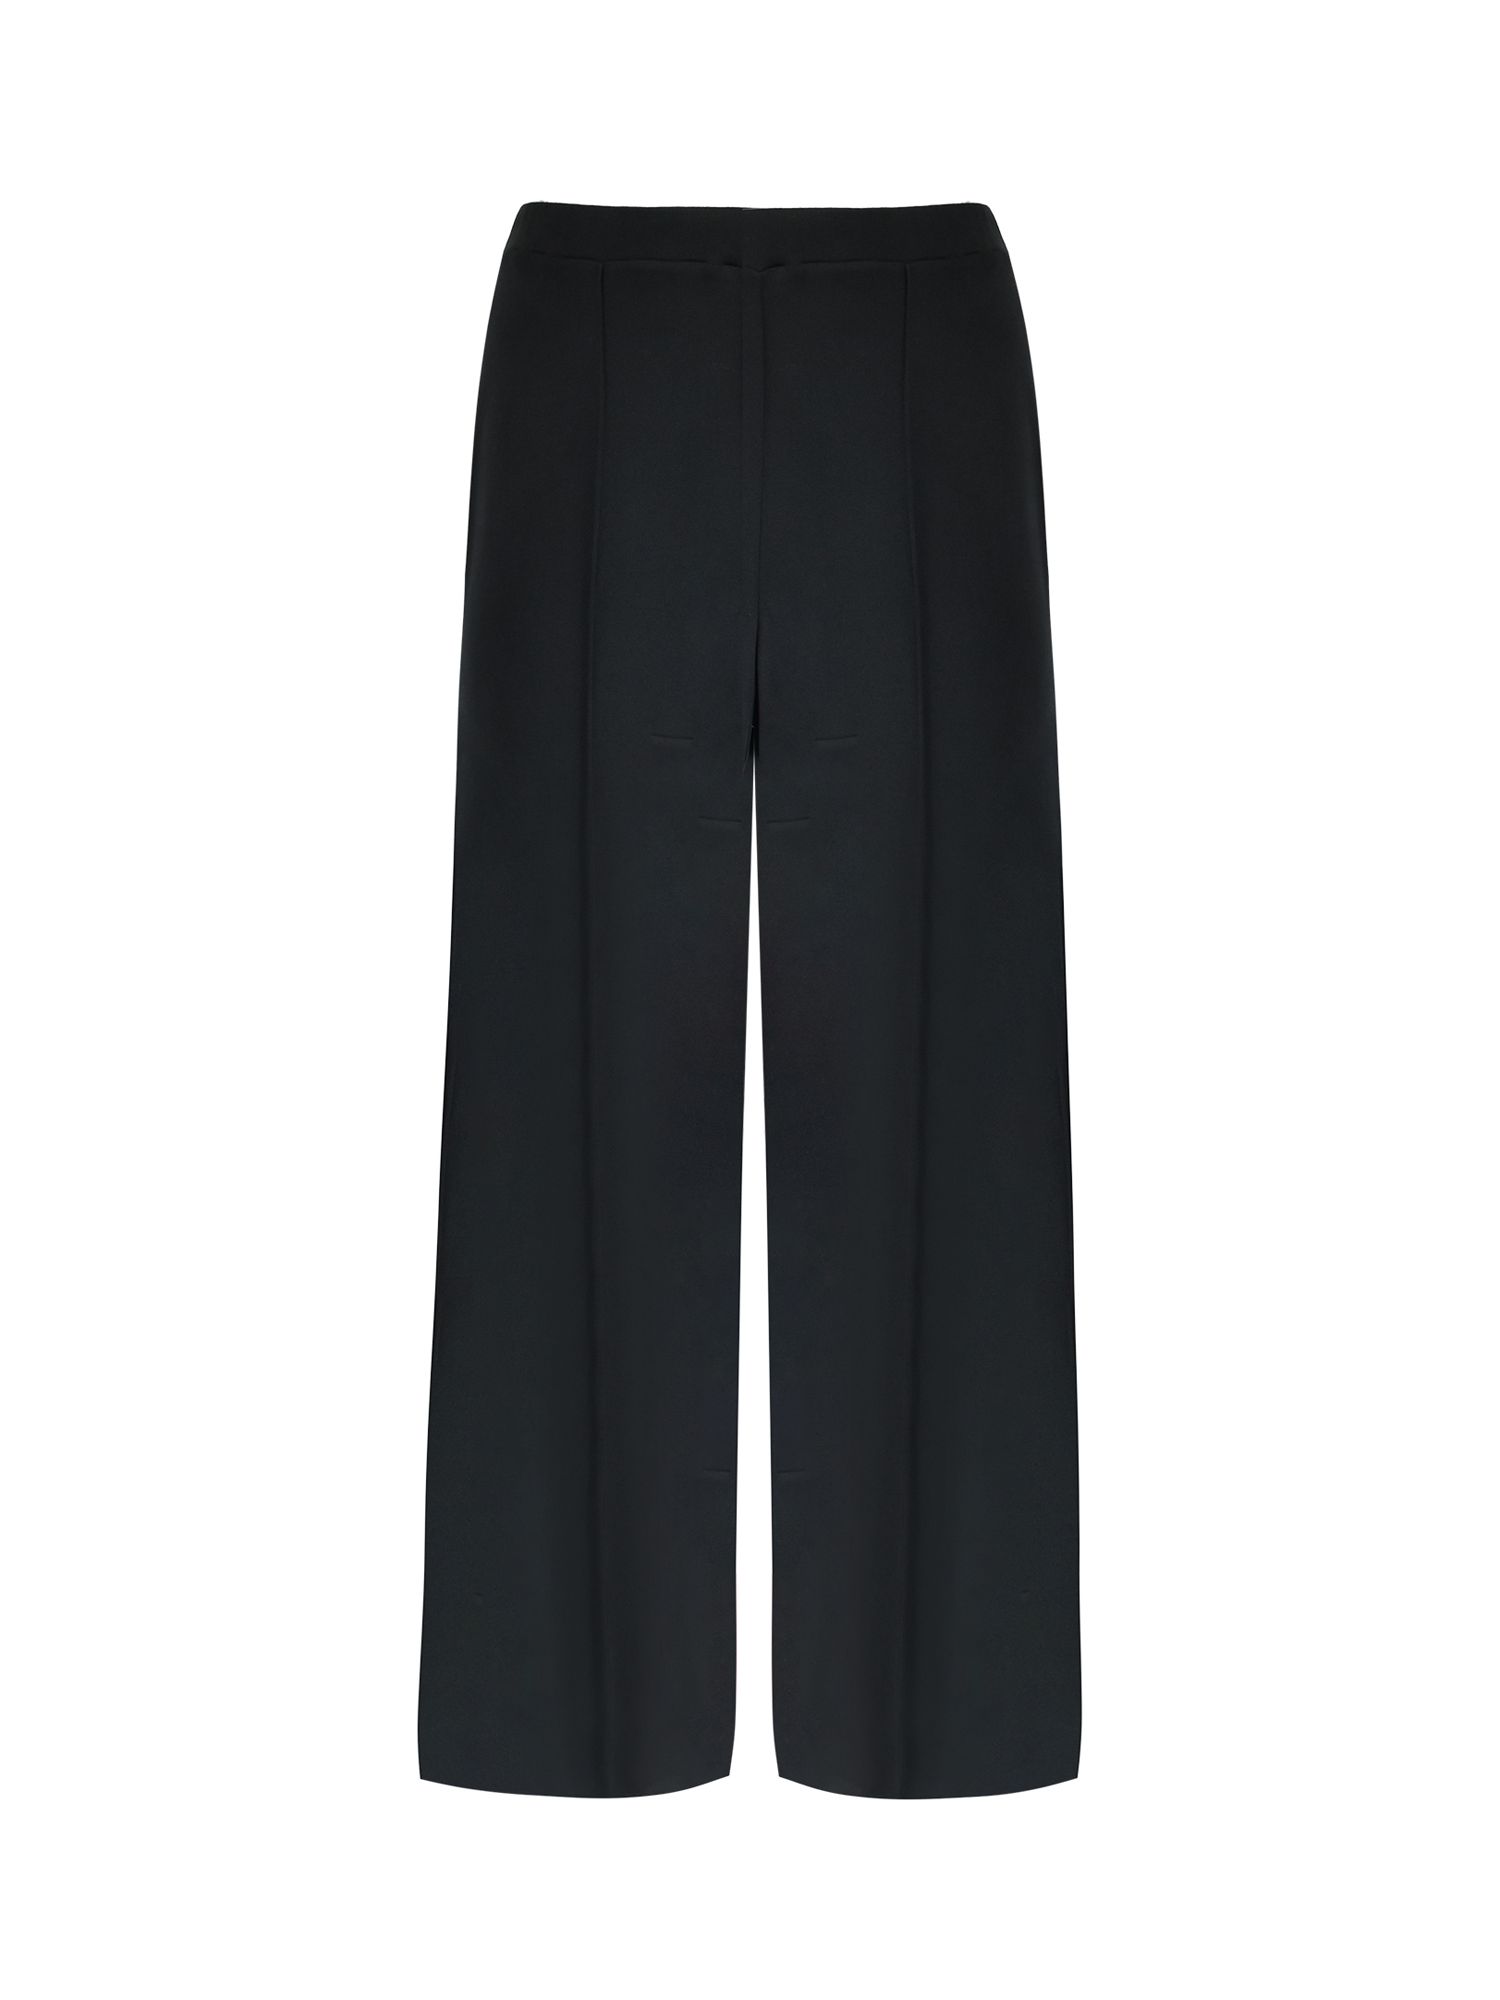 Buy Live Unlimited Curve Jersey Bootleg Trousers, Black Online at johnlewis.com